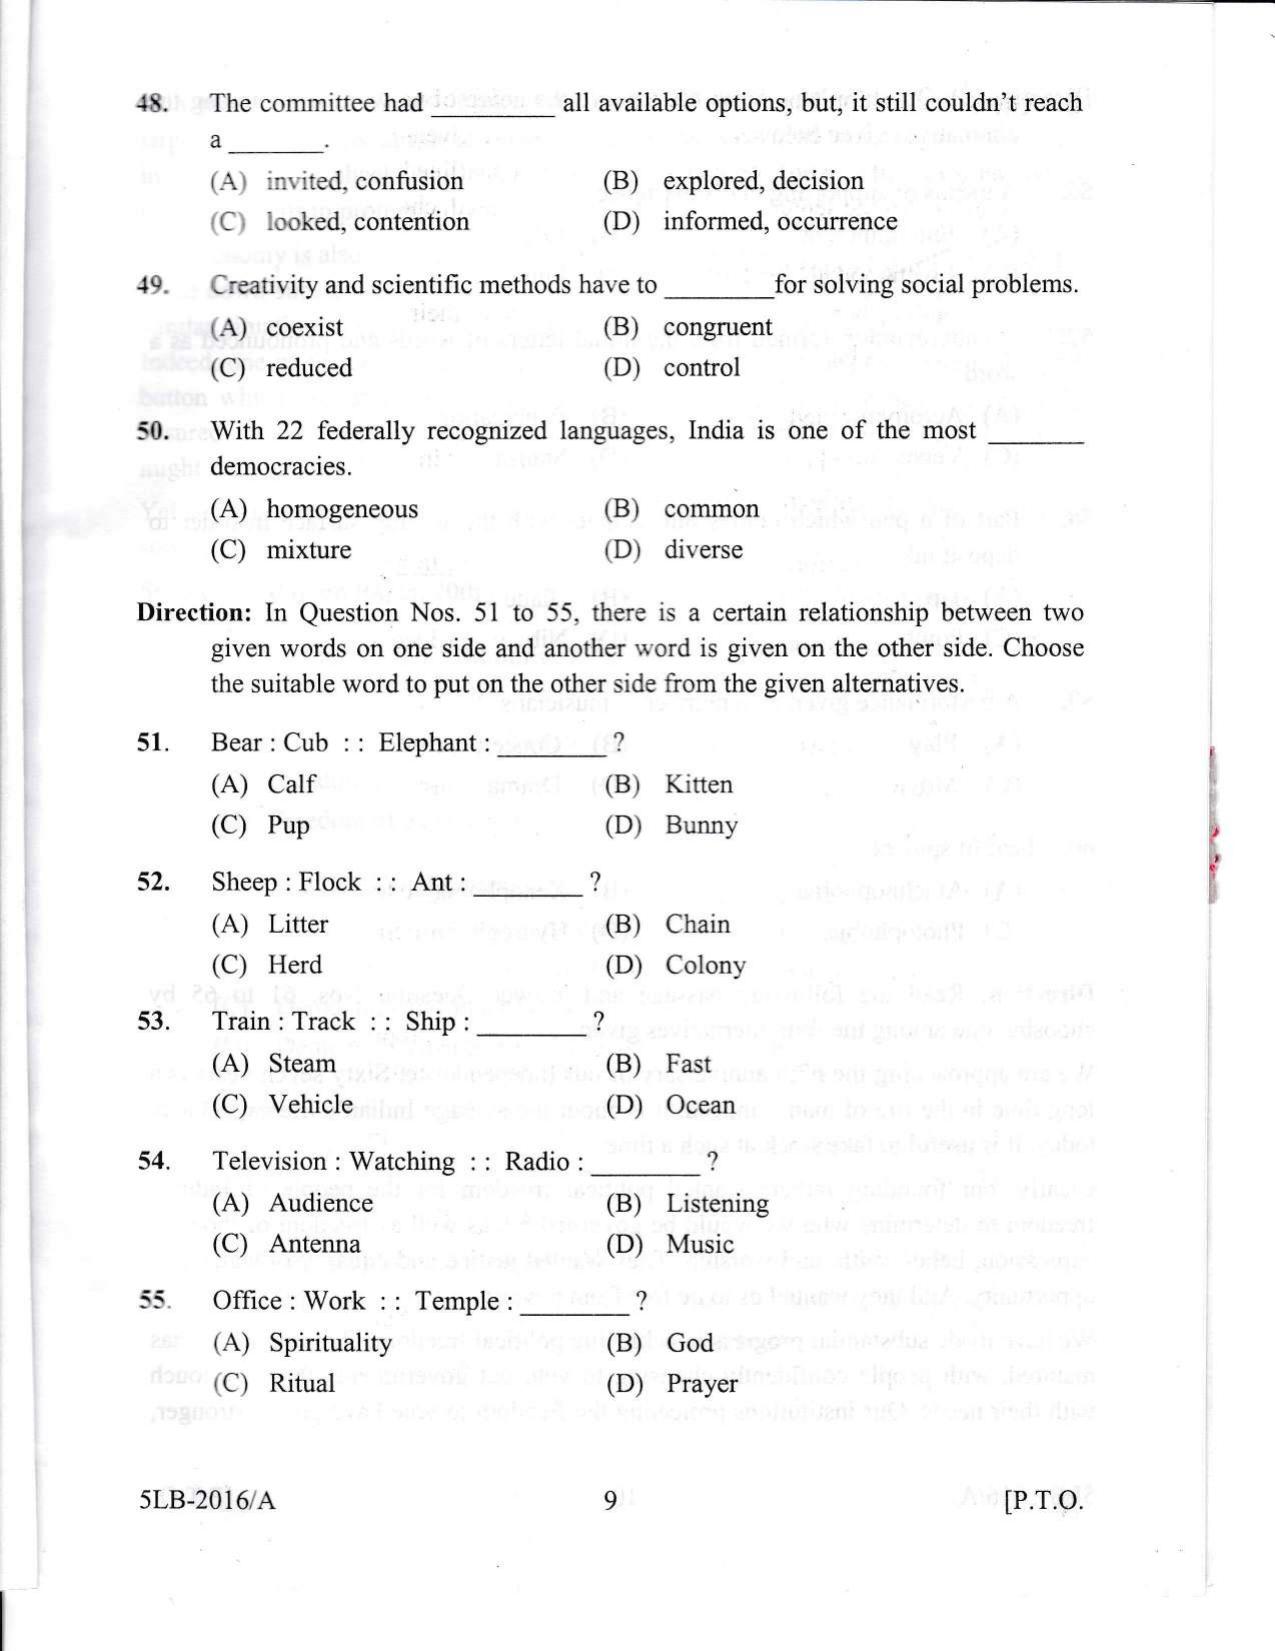 KLEE 5 Year LLB Exam 2016 Question Paper - Page 9